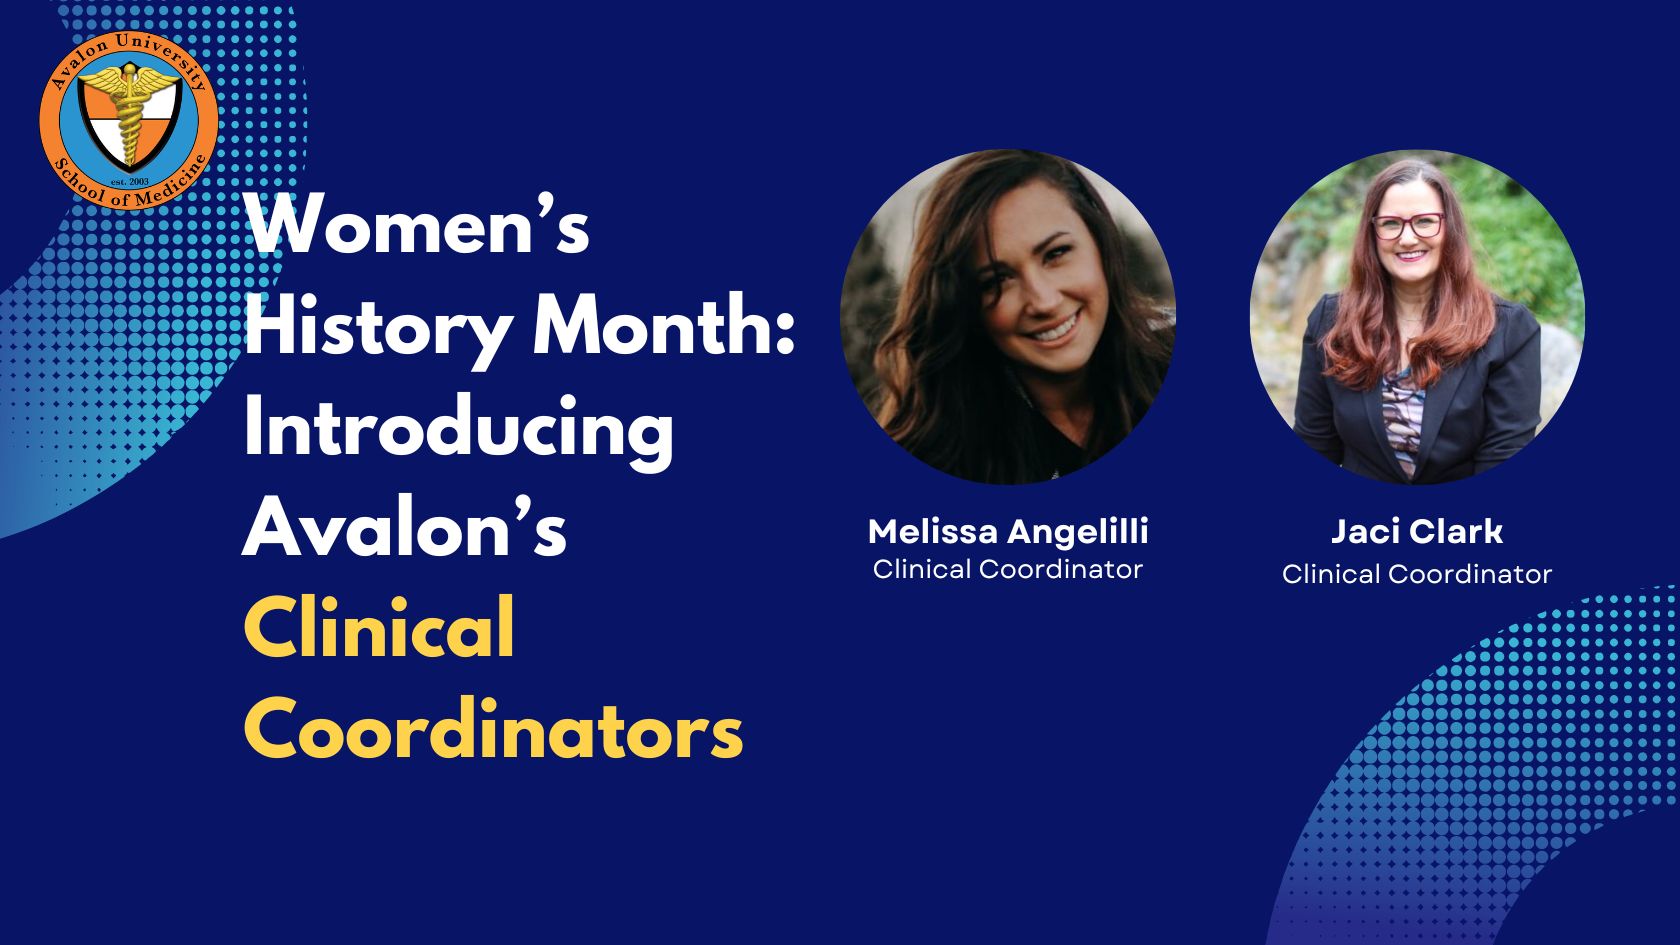 Women’s History Month Introducing Avalon’s Clinical Coordinators